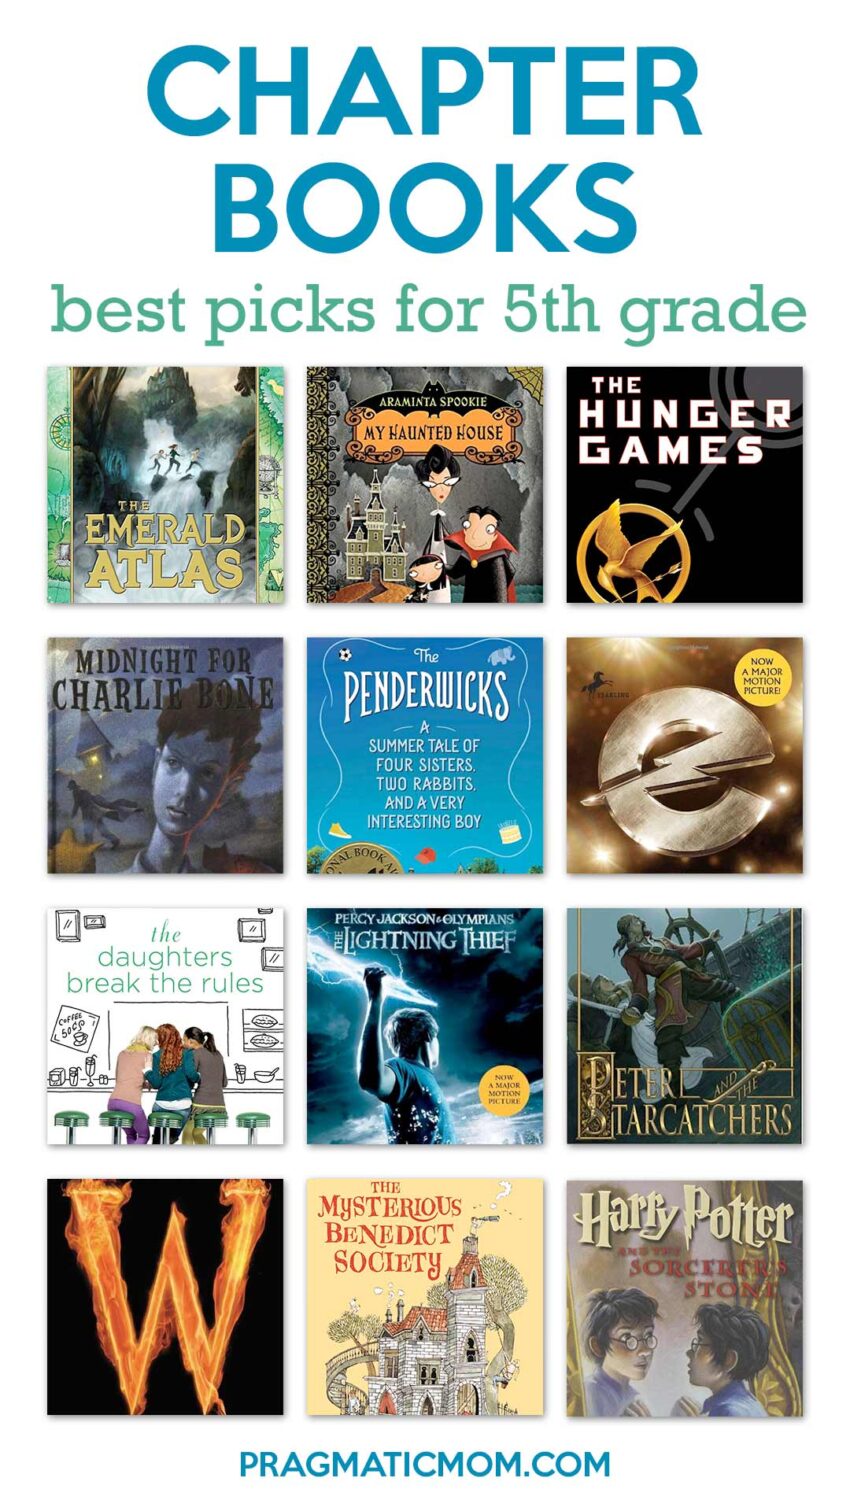 Best Chapter Books for 5th Grade